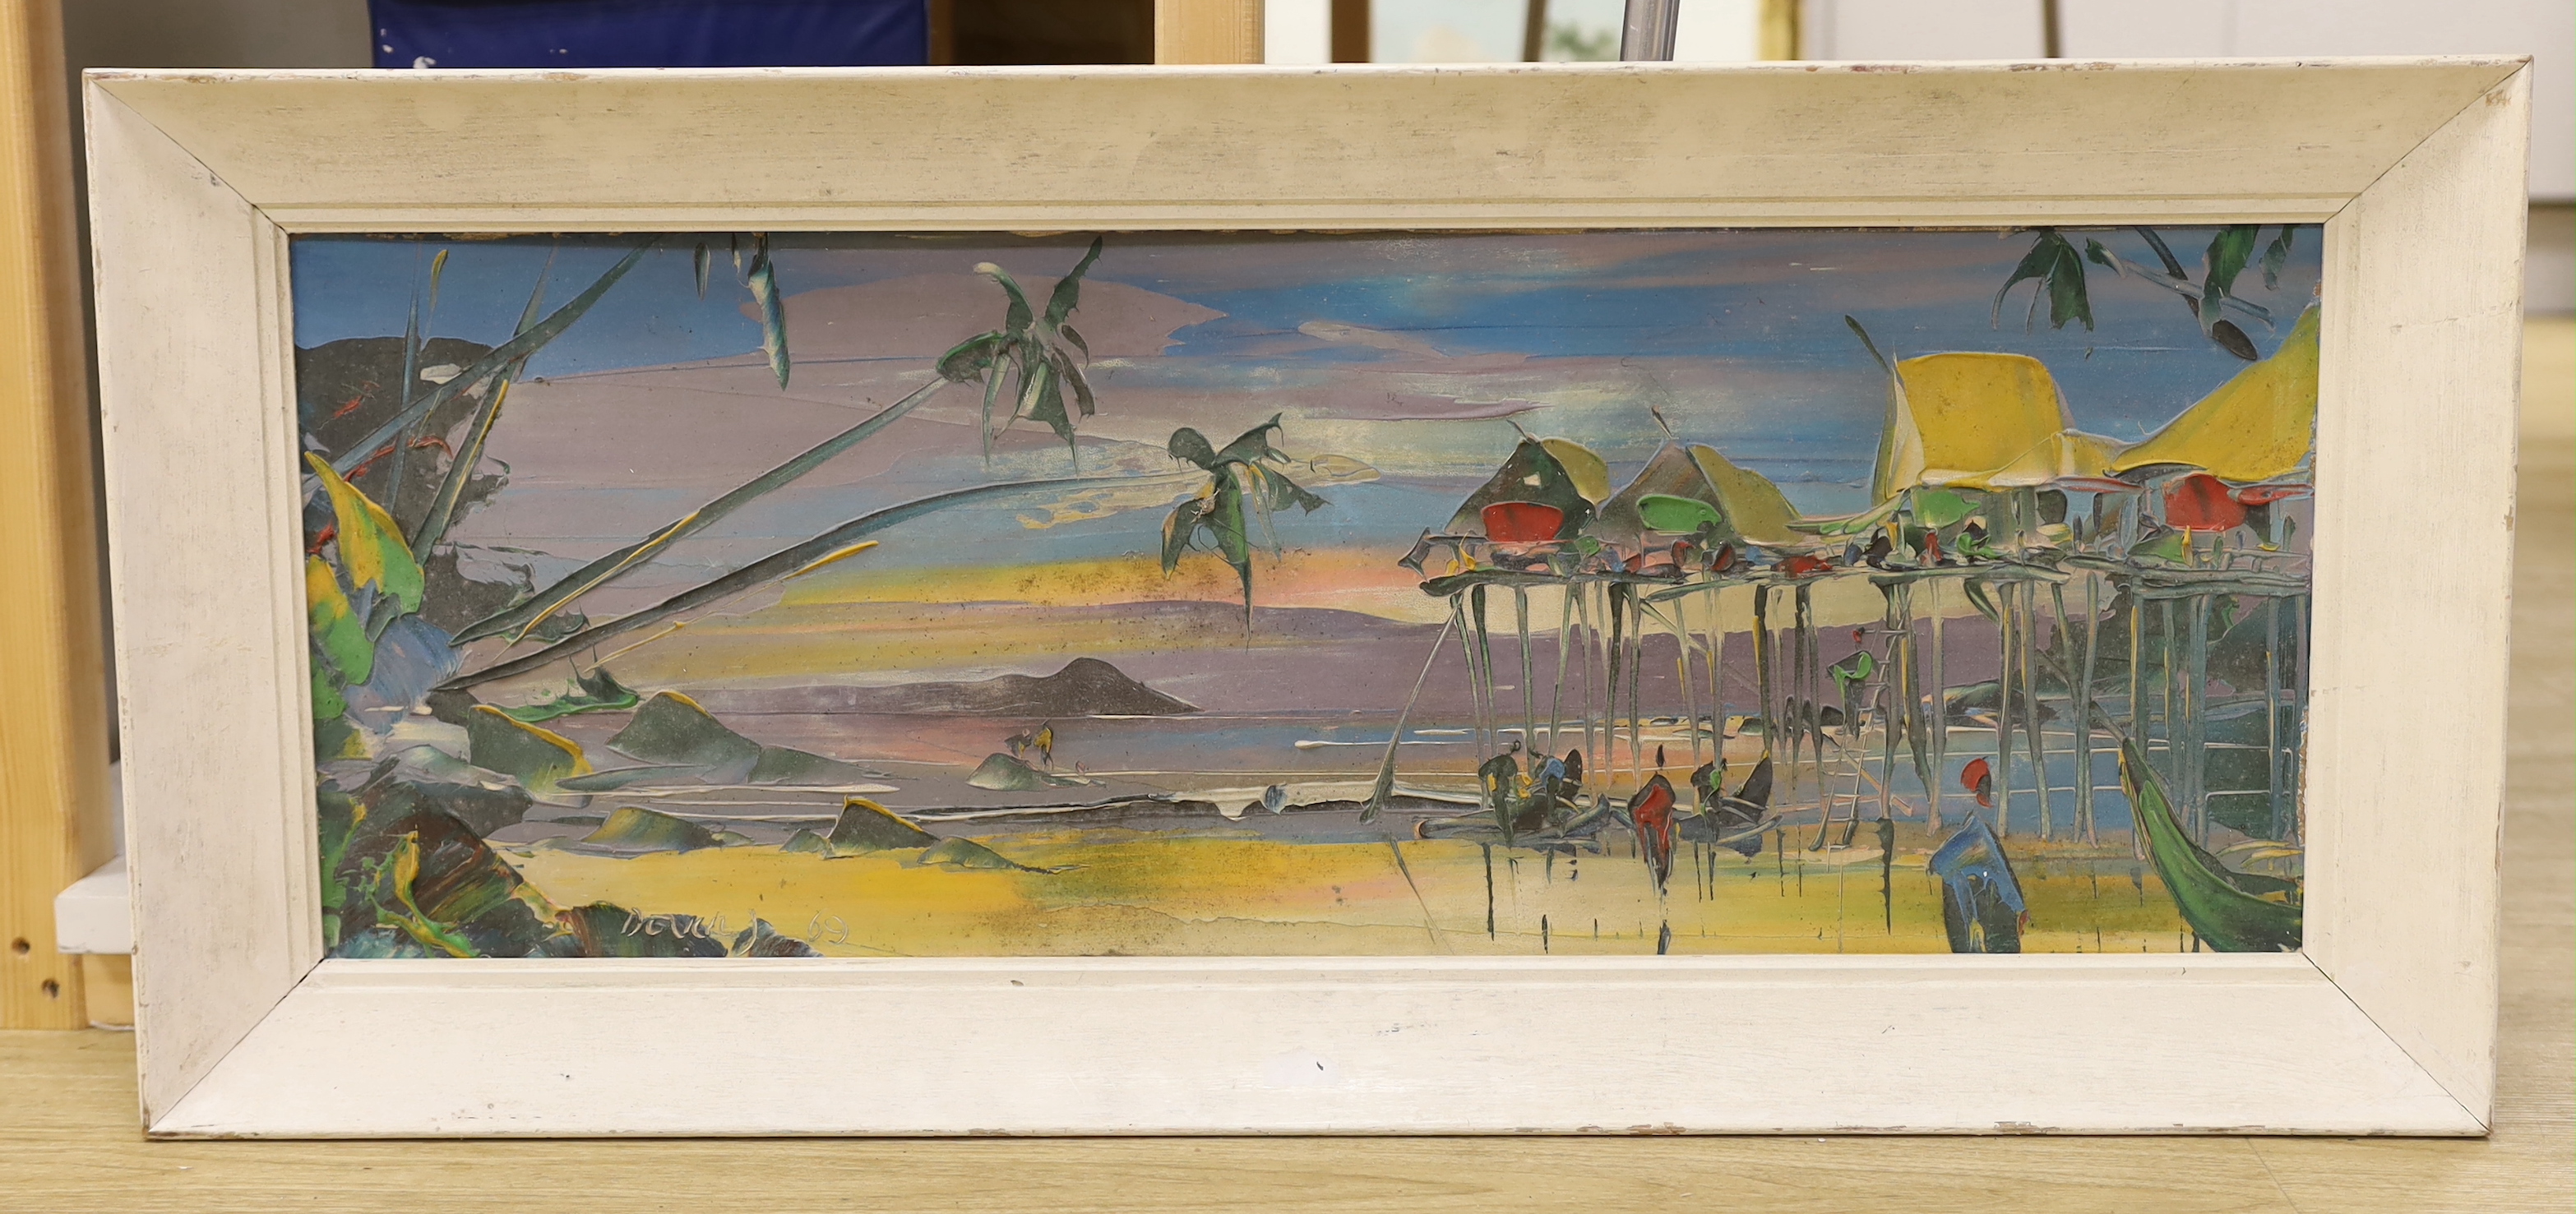 George Richard Deakins, oil on canvas, Caribbean beach scene, signed and dated 69, 30 x 80cm